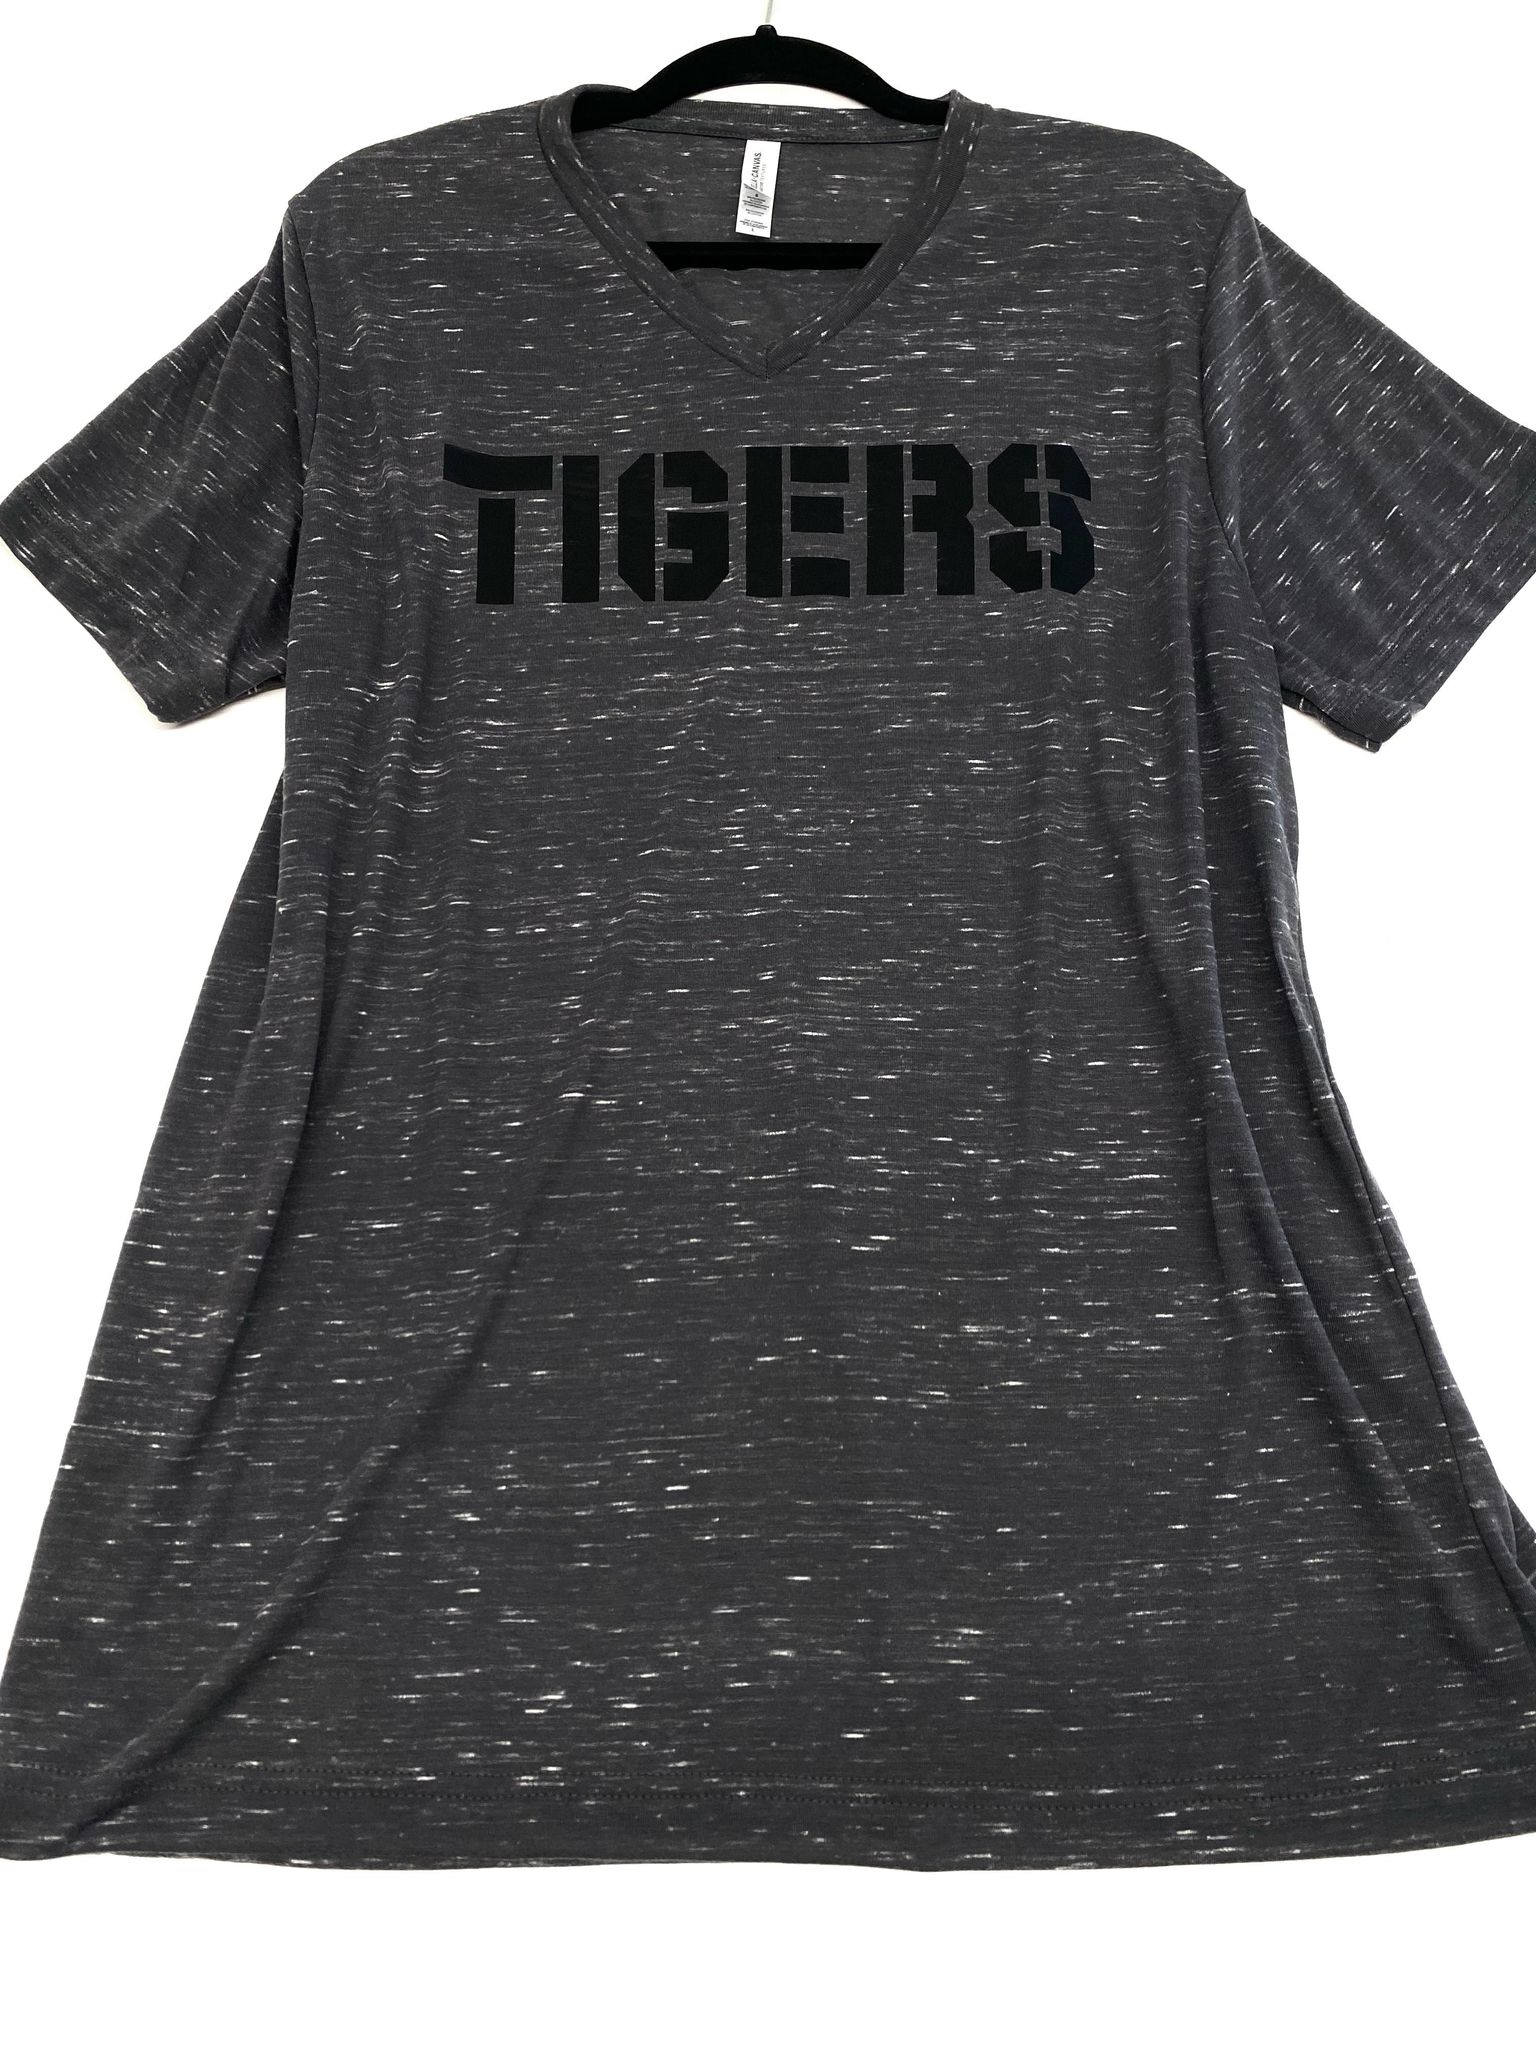 Grey All Day Tigers Tee